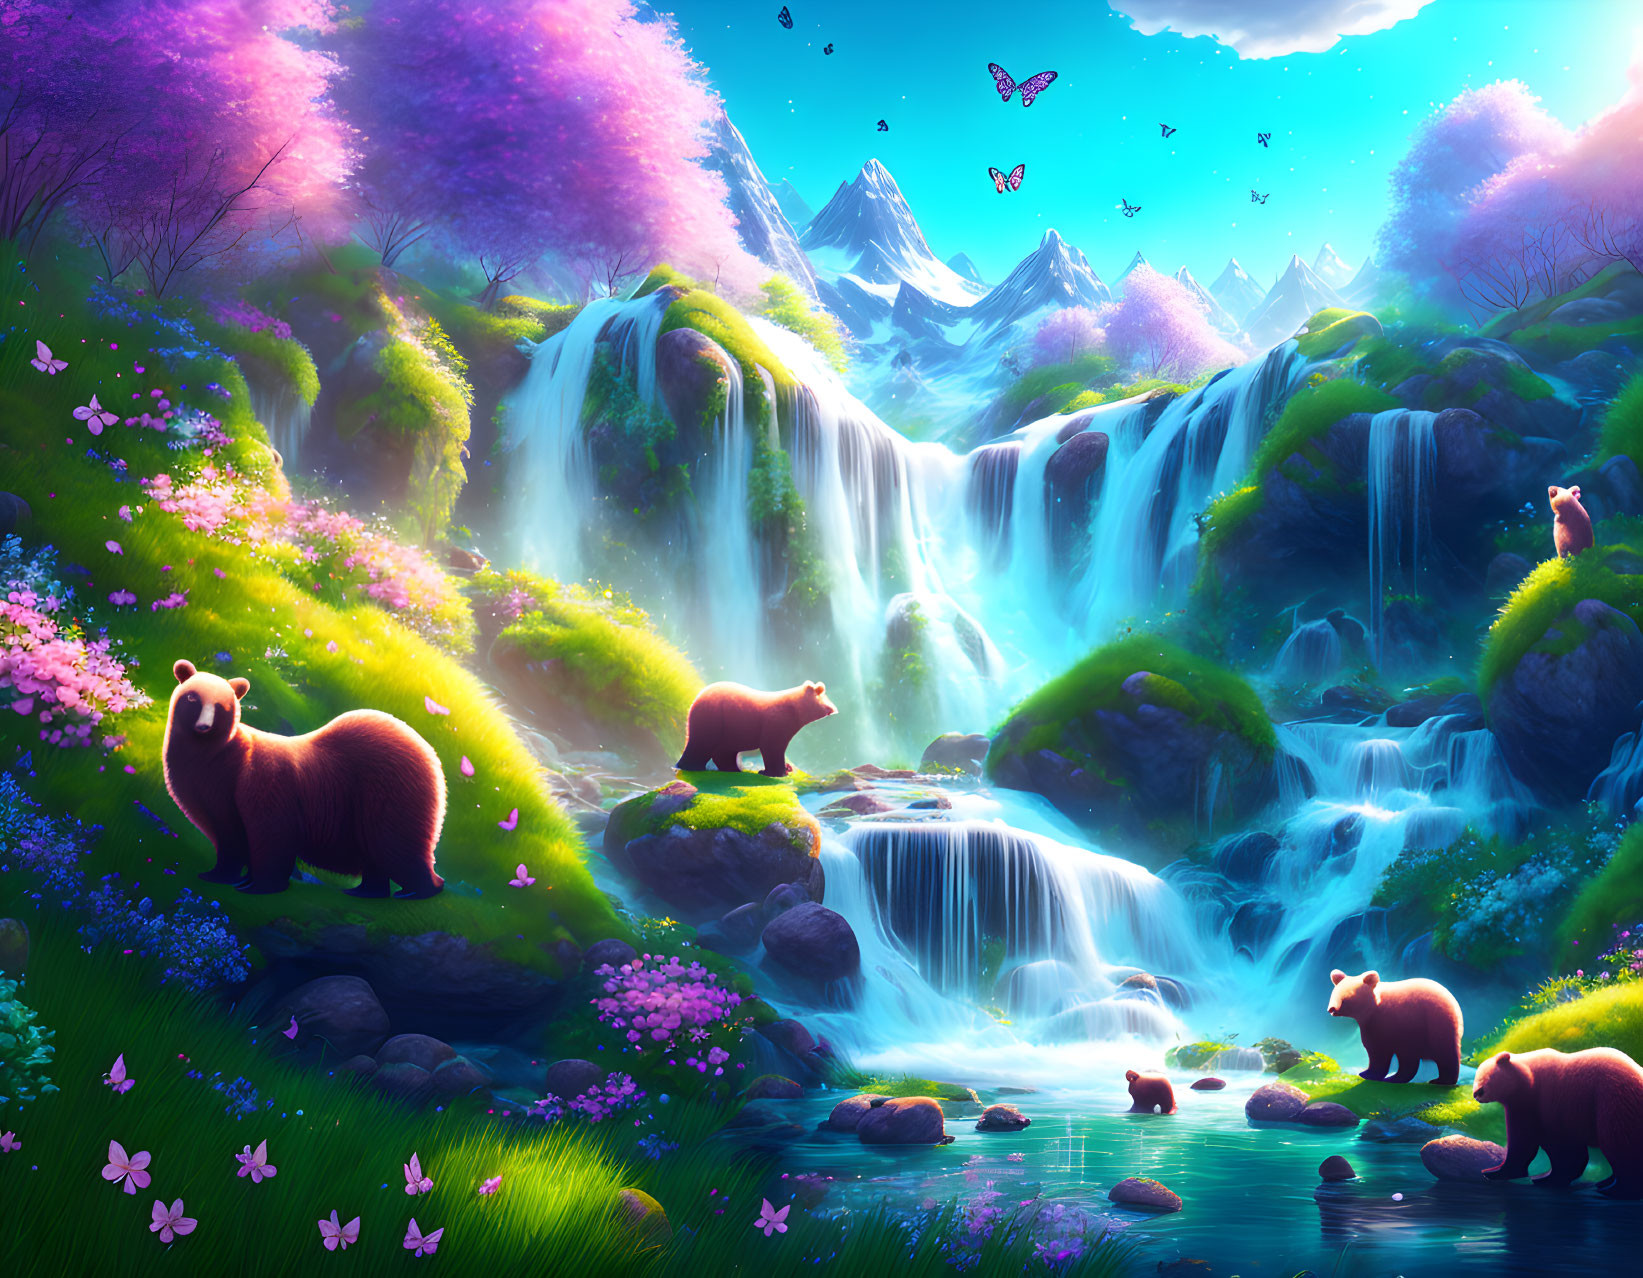 Colorful landscape with bears, waterfall, and butterflies